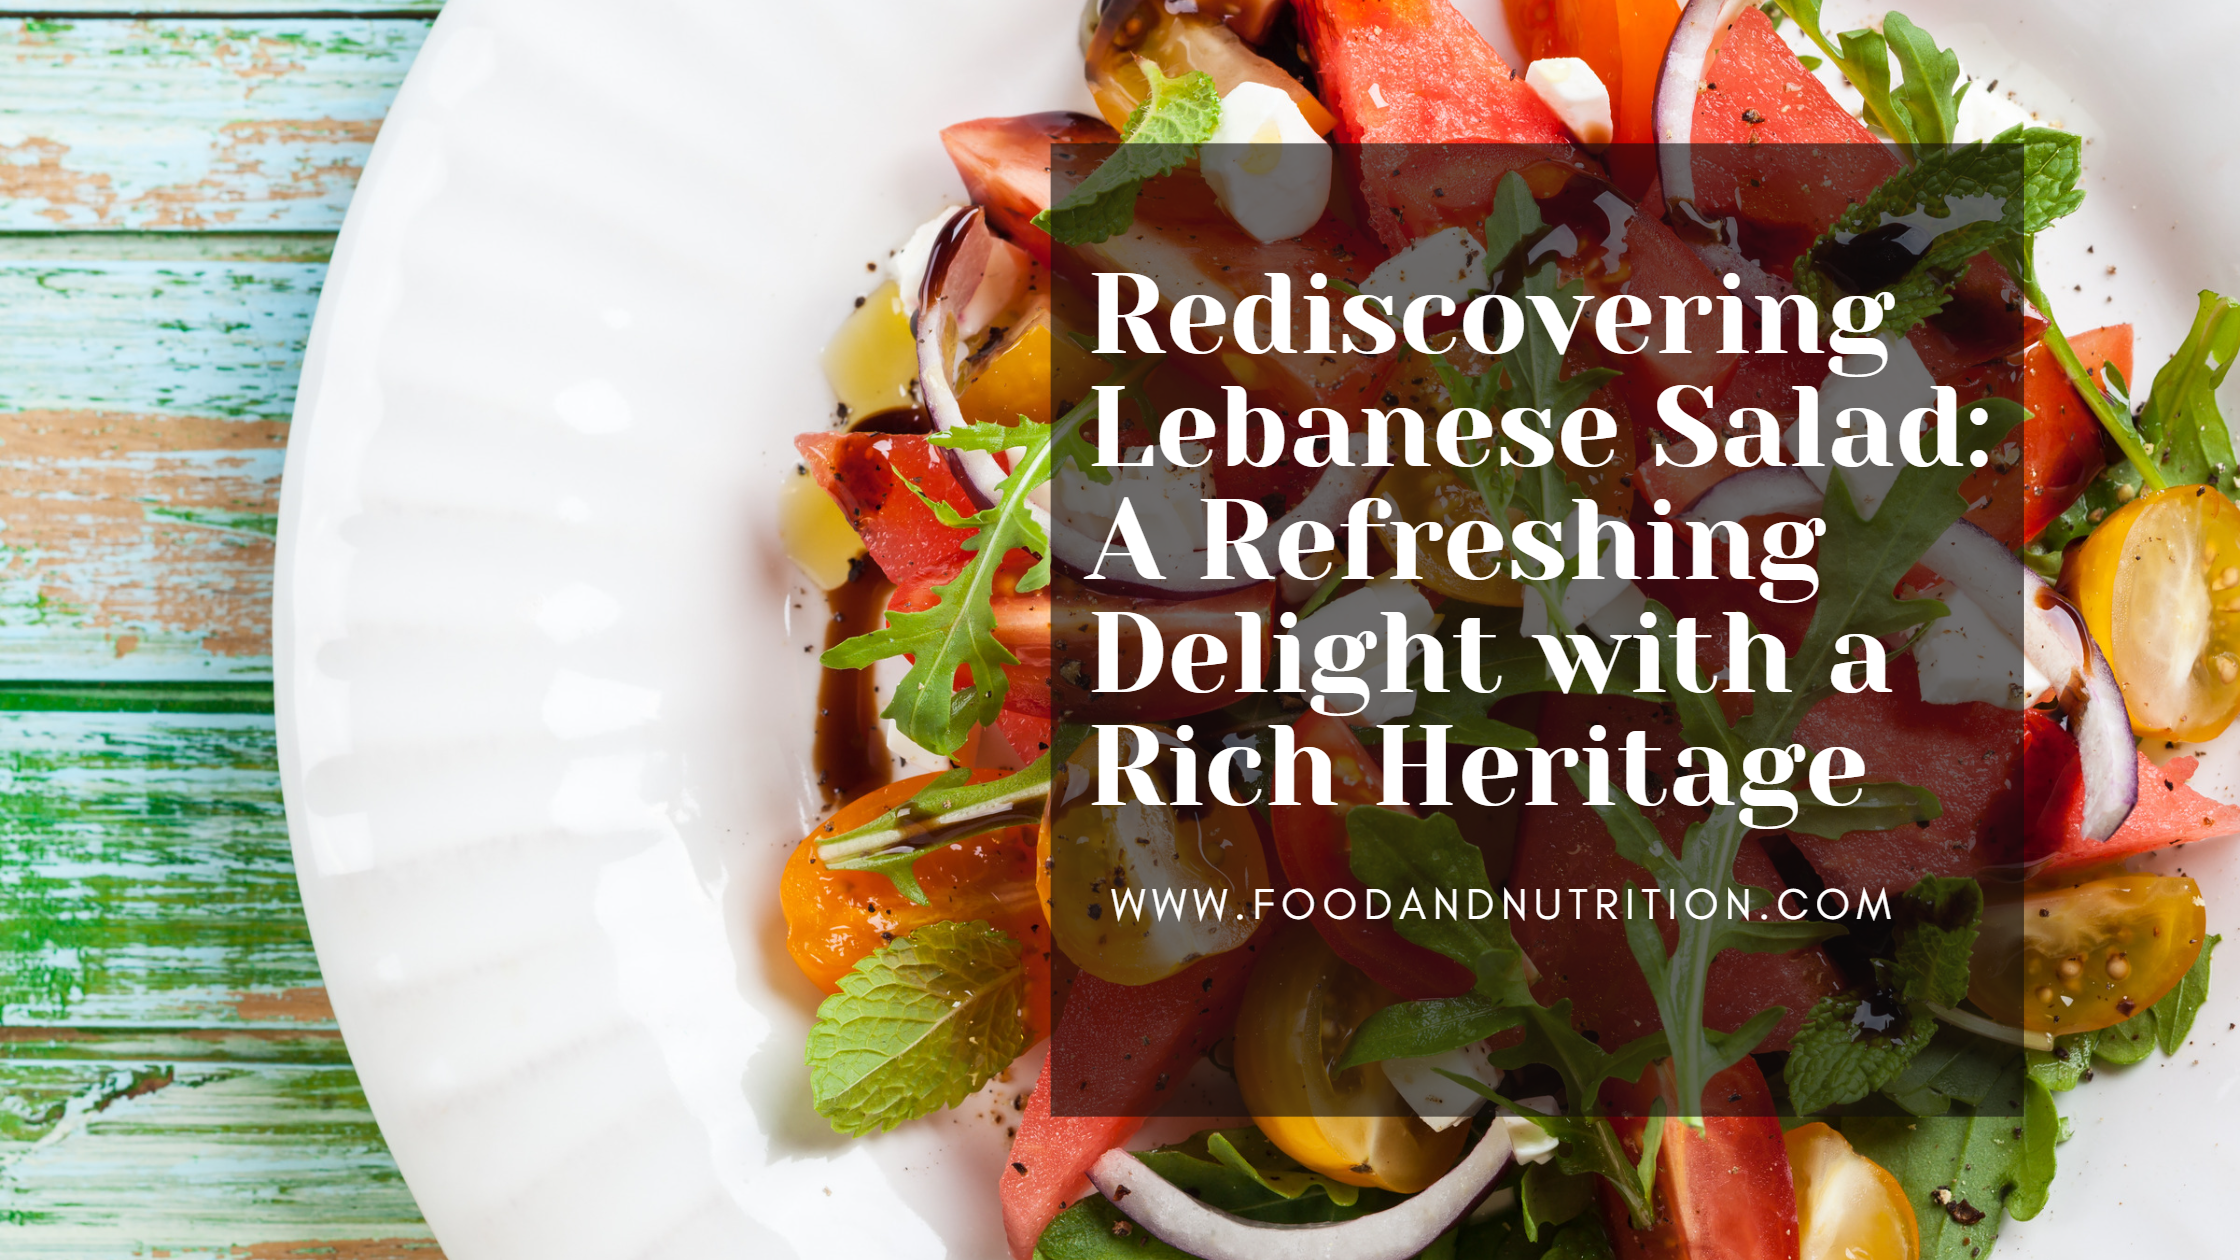 Rediscovering Lebanese Salad: A Refreshing Delight with a Rich Heritage